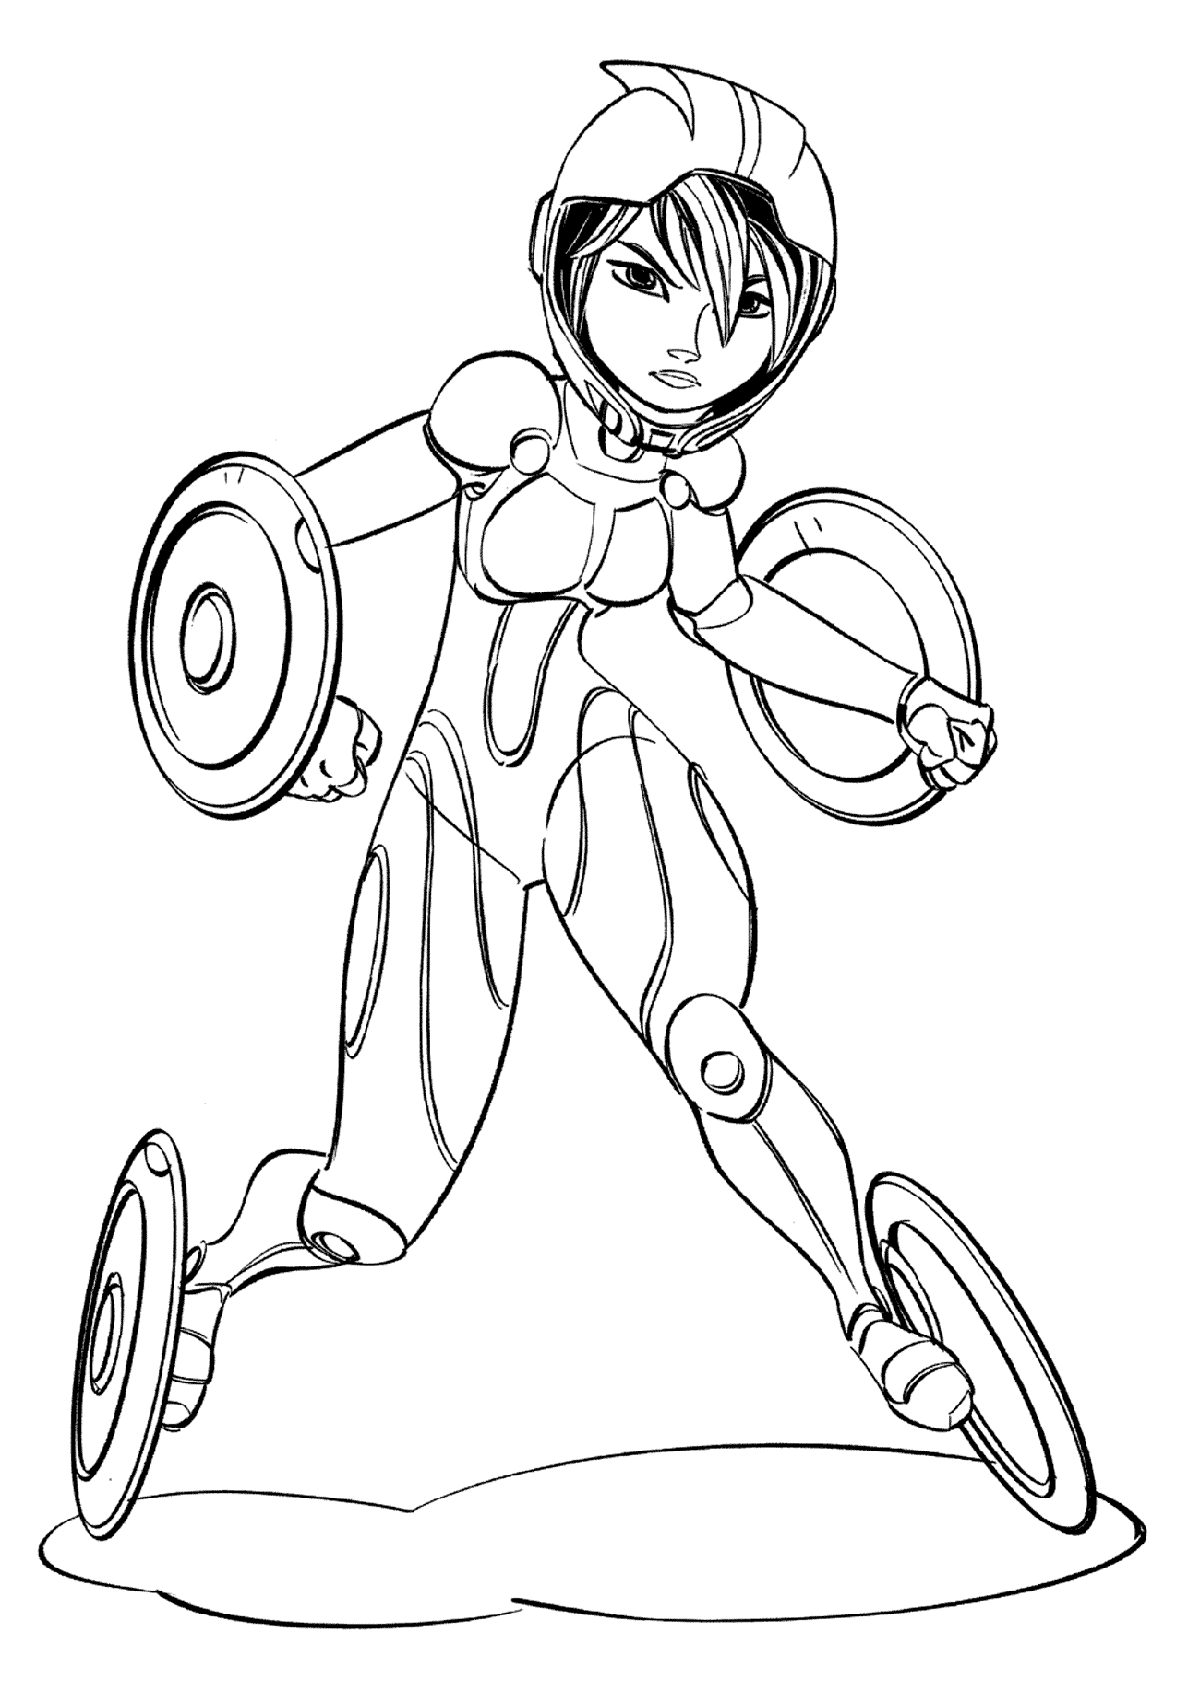 Big hero 6 coloring pages to download and print for free